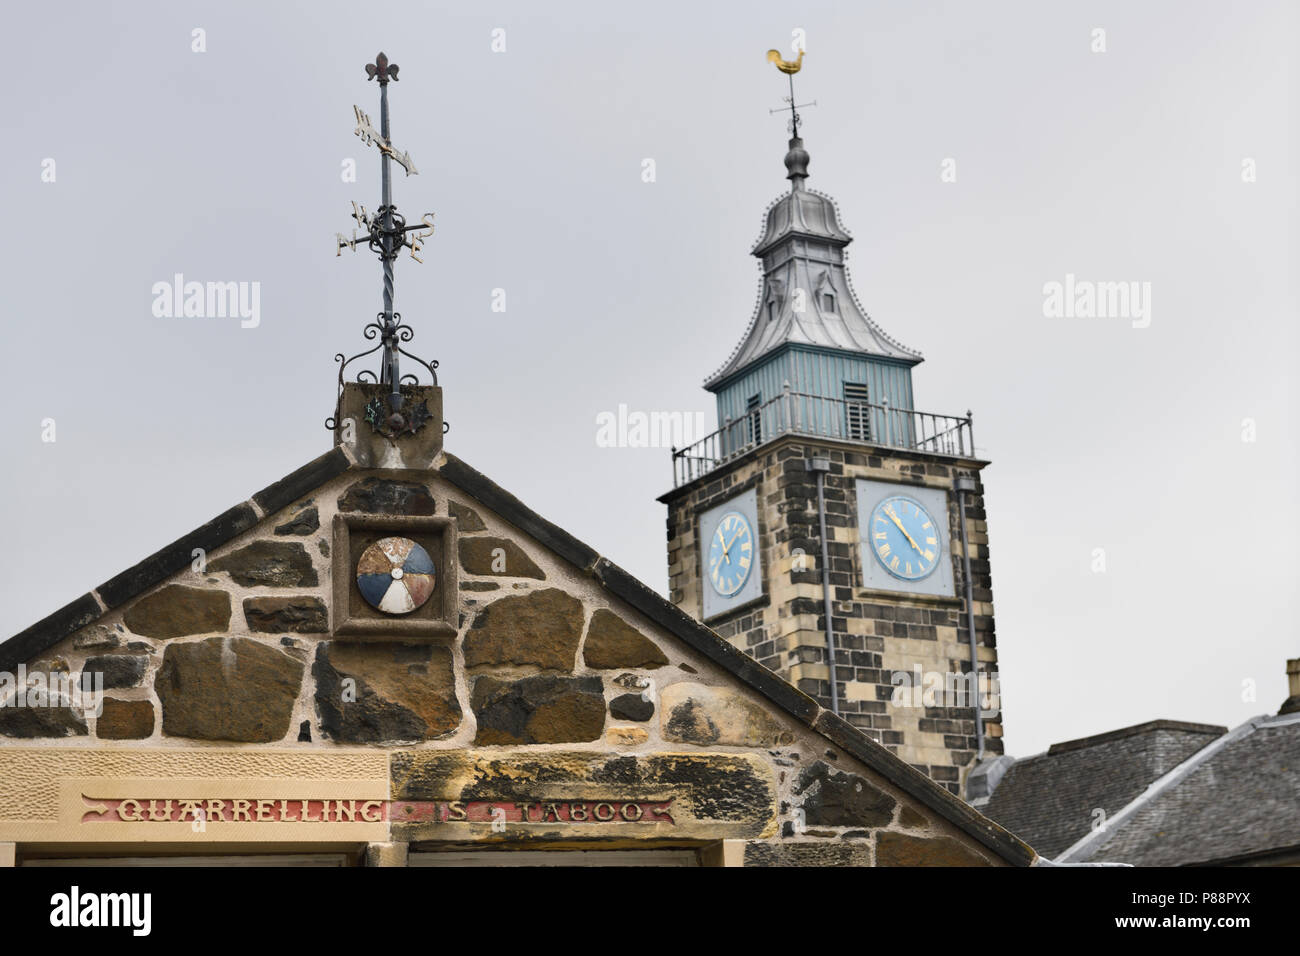 Quarrelling is Taboo on the Stirling Boys Club building with The Tolbooth clock tower Stirling Scotland UK Stock Photo